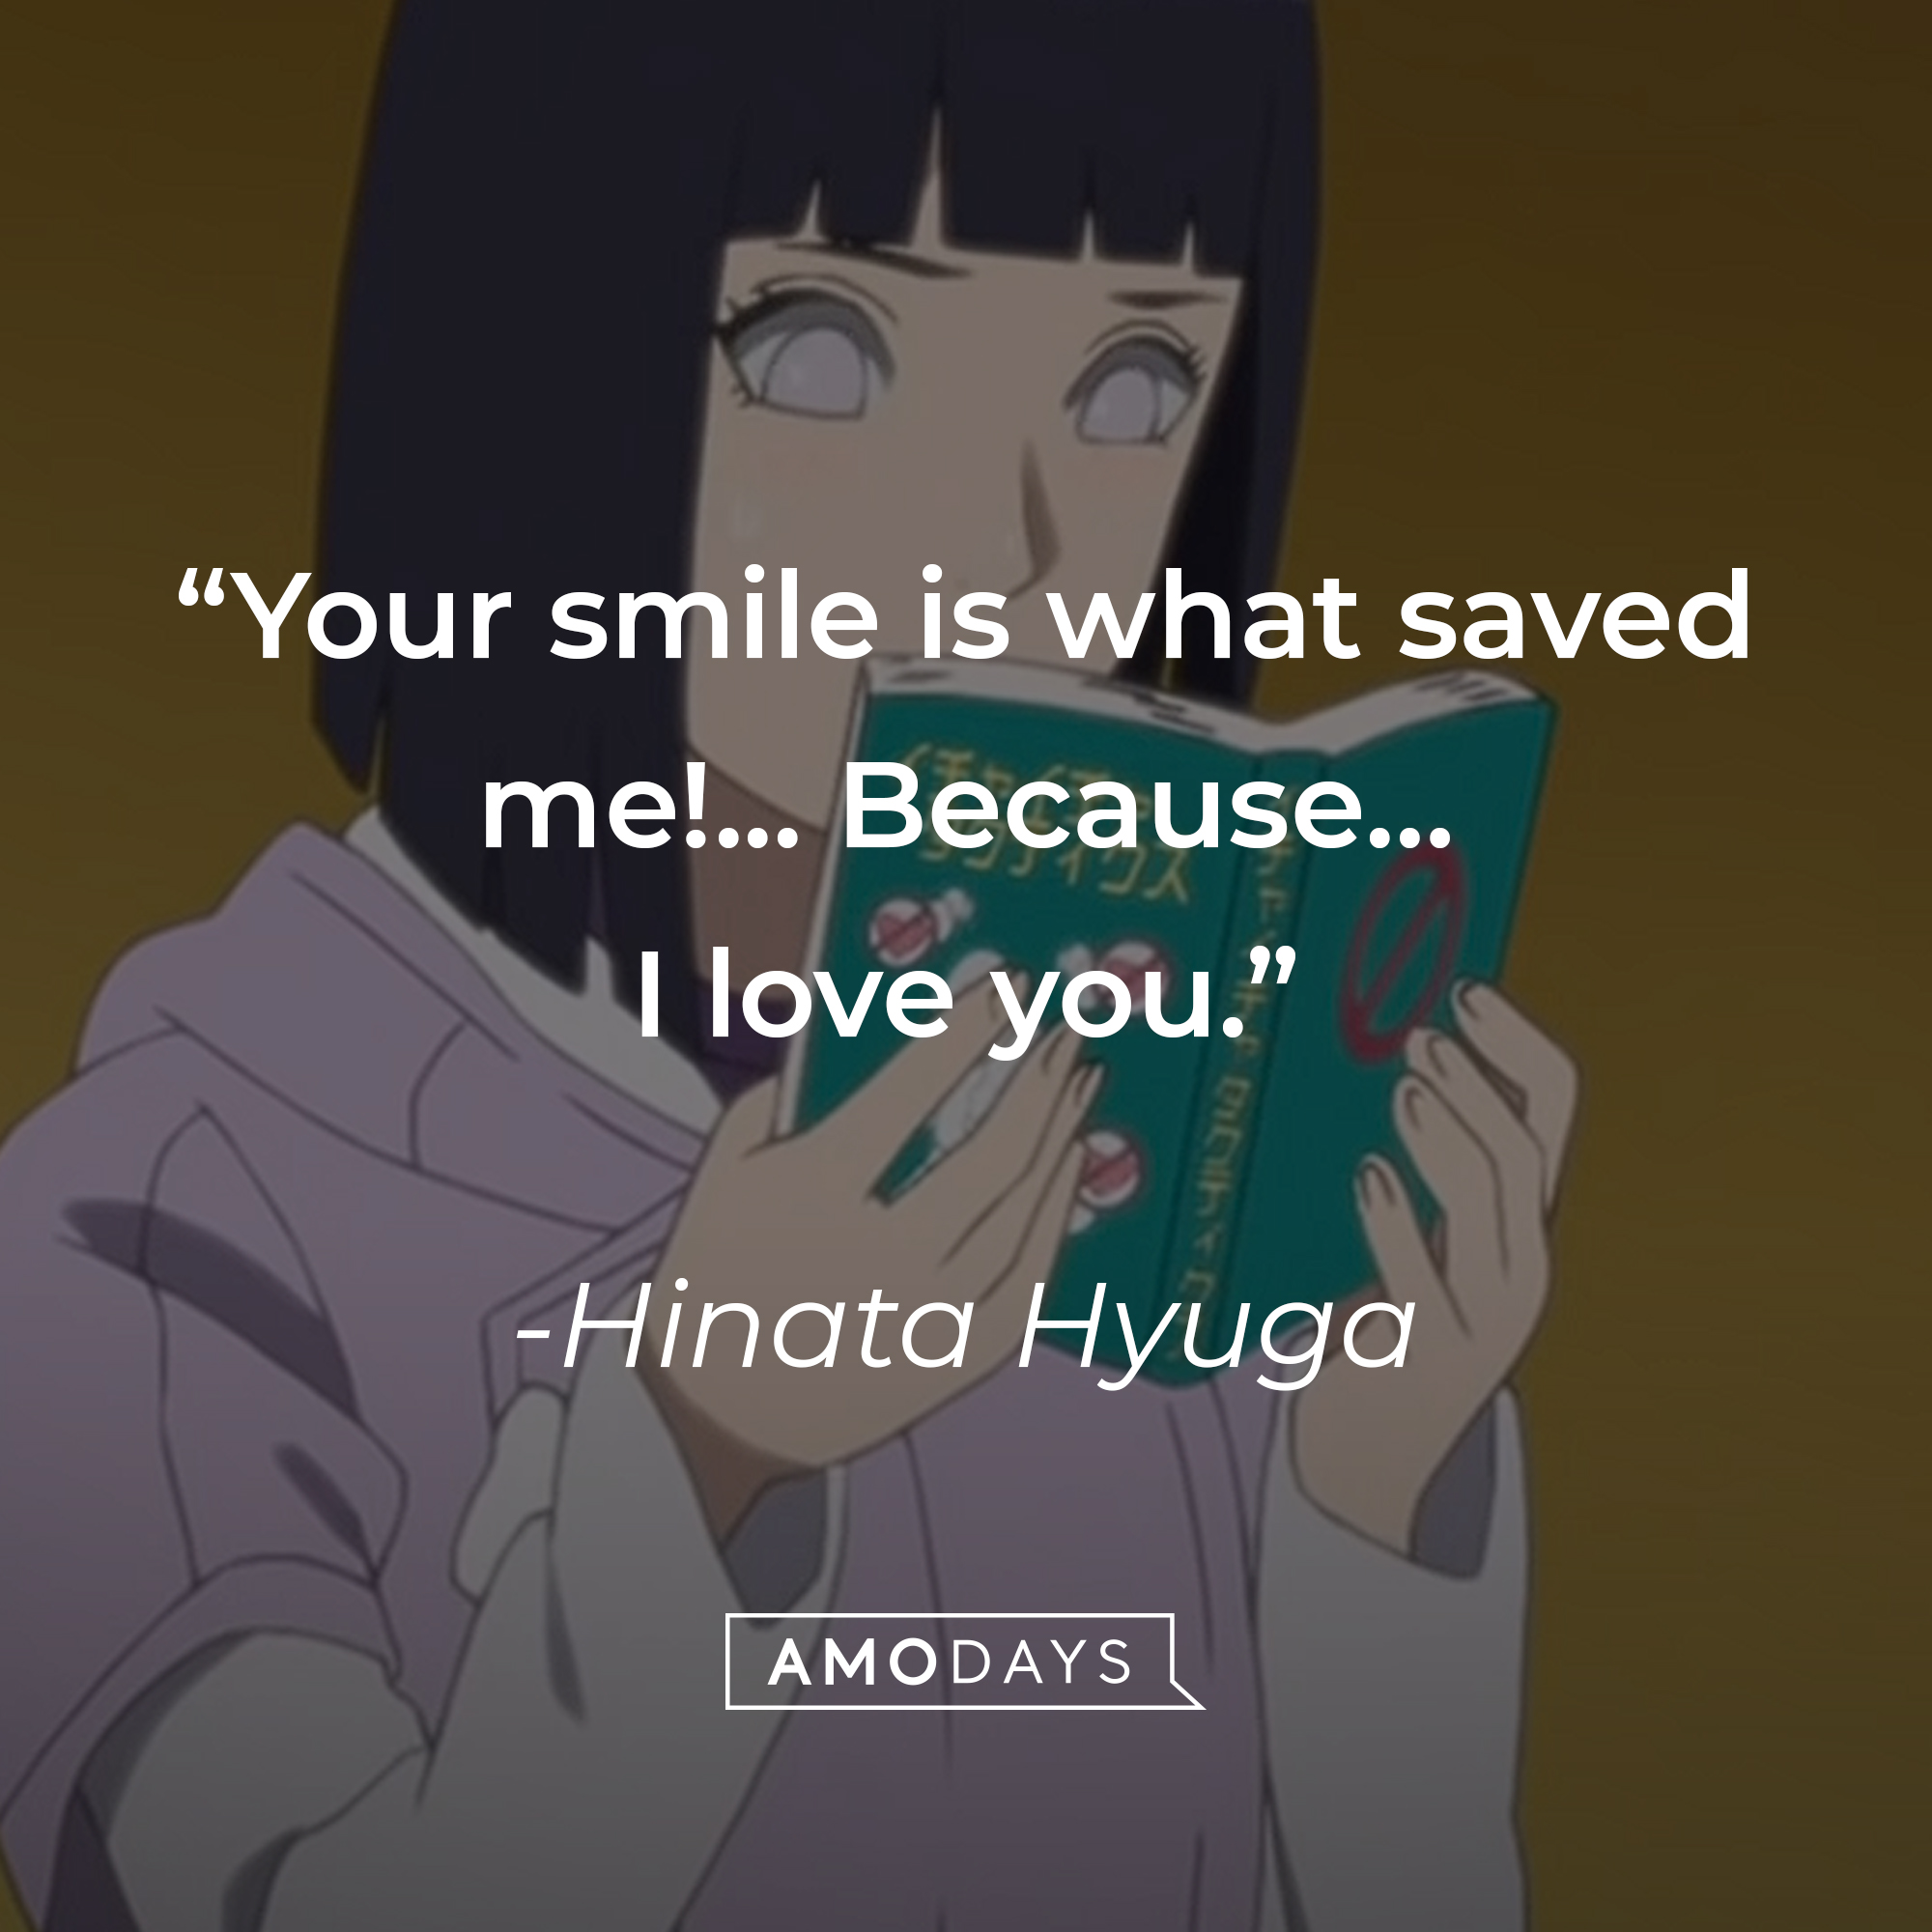 Hinata Hyuga with her quote: “Your smile is what saved me!...! Because… I love you.” | Source: youtube.com/CrunchyrollCollection